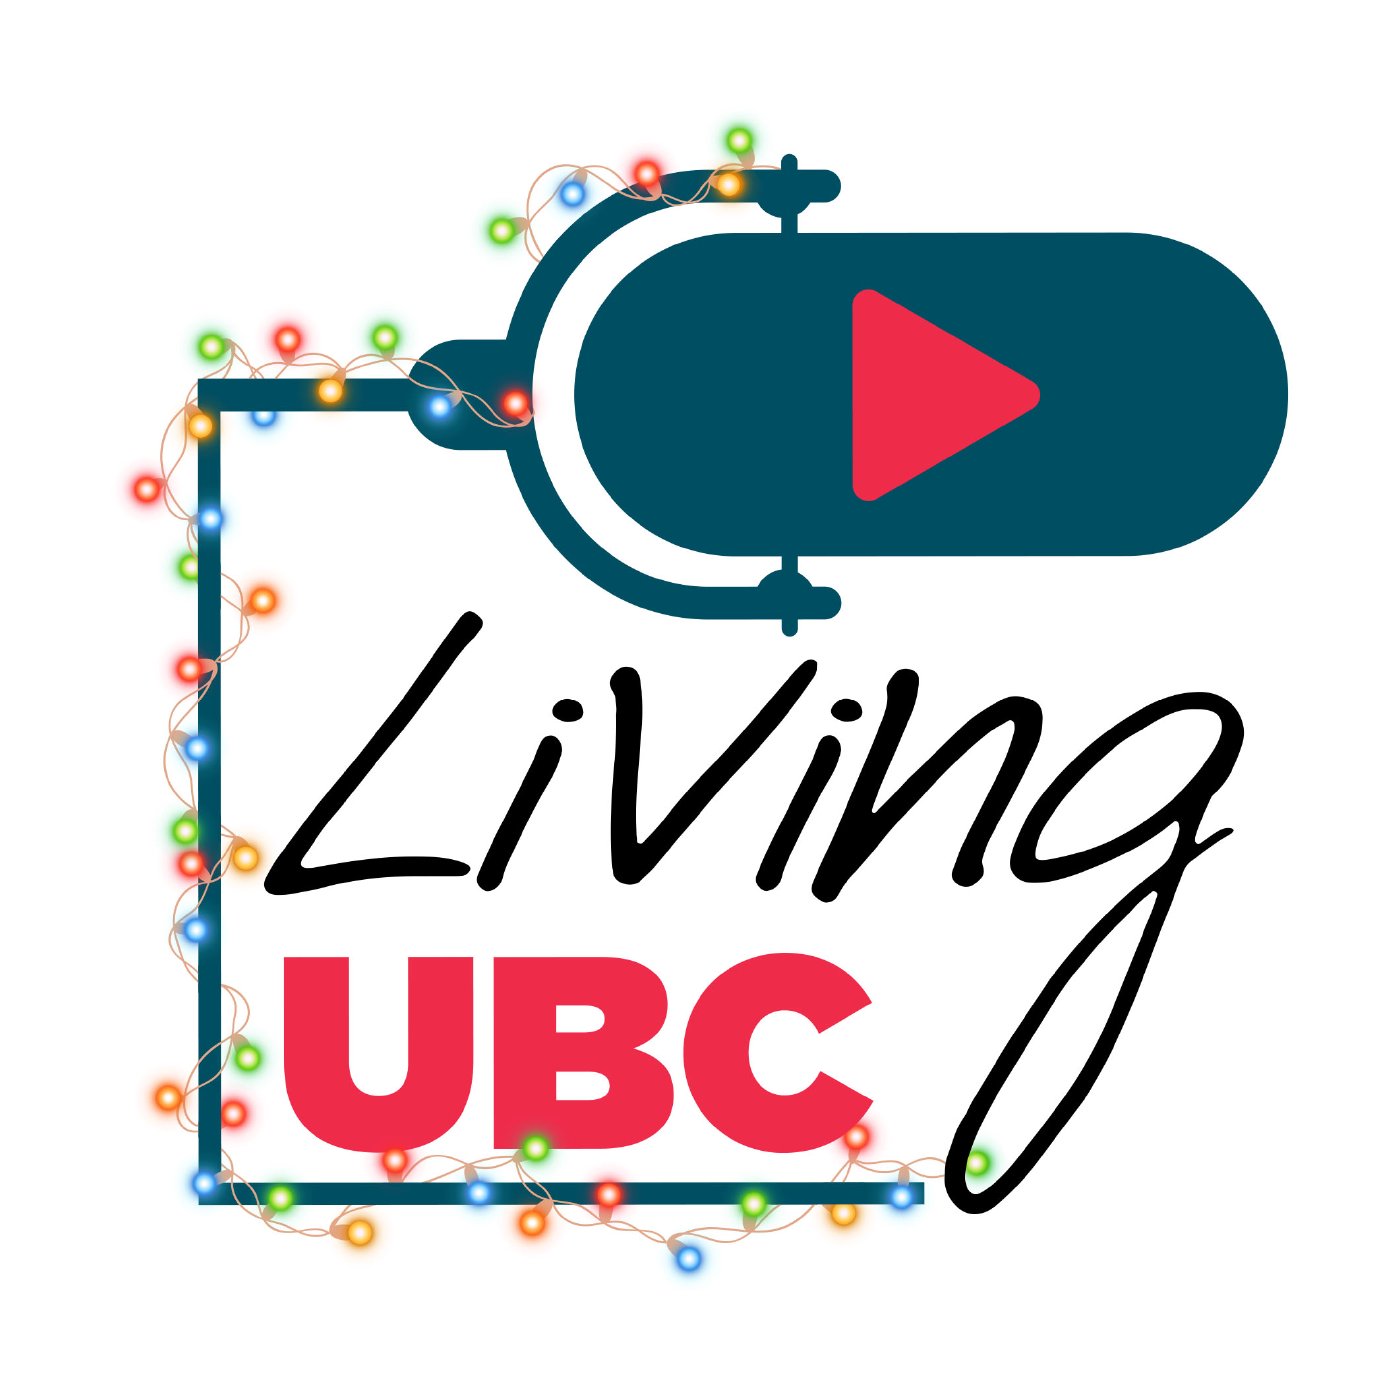 130: UBC's South Africa Connections